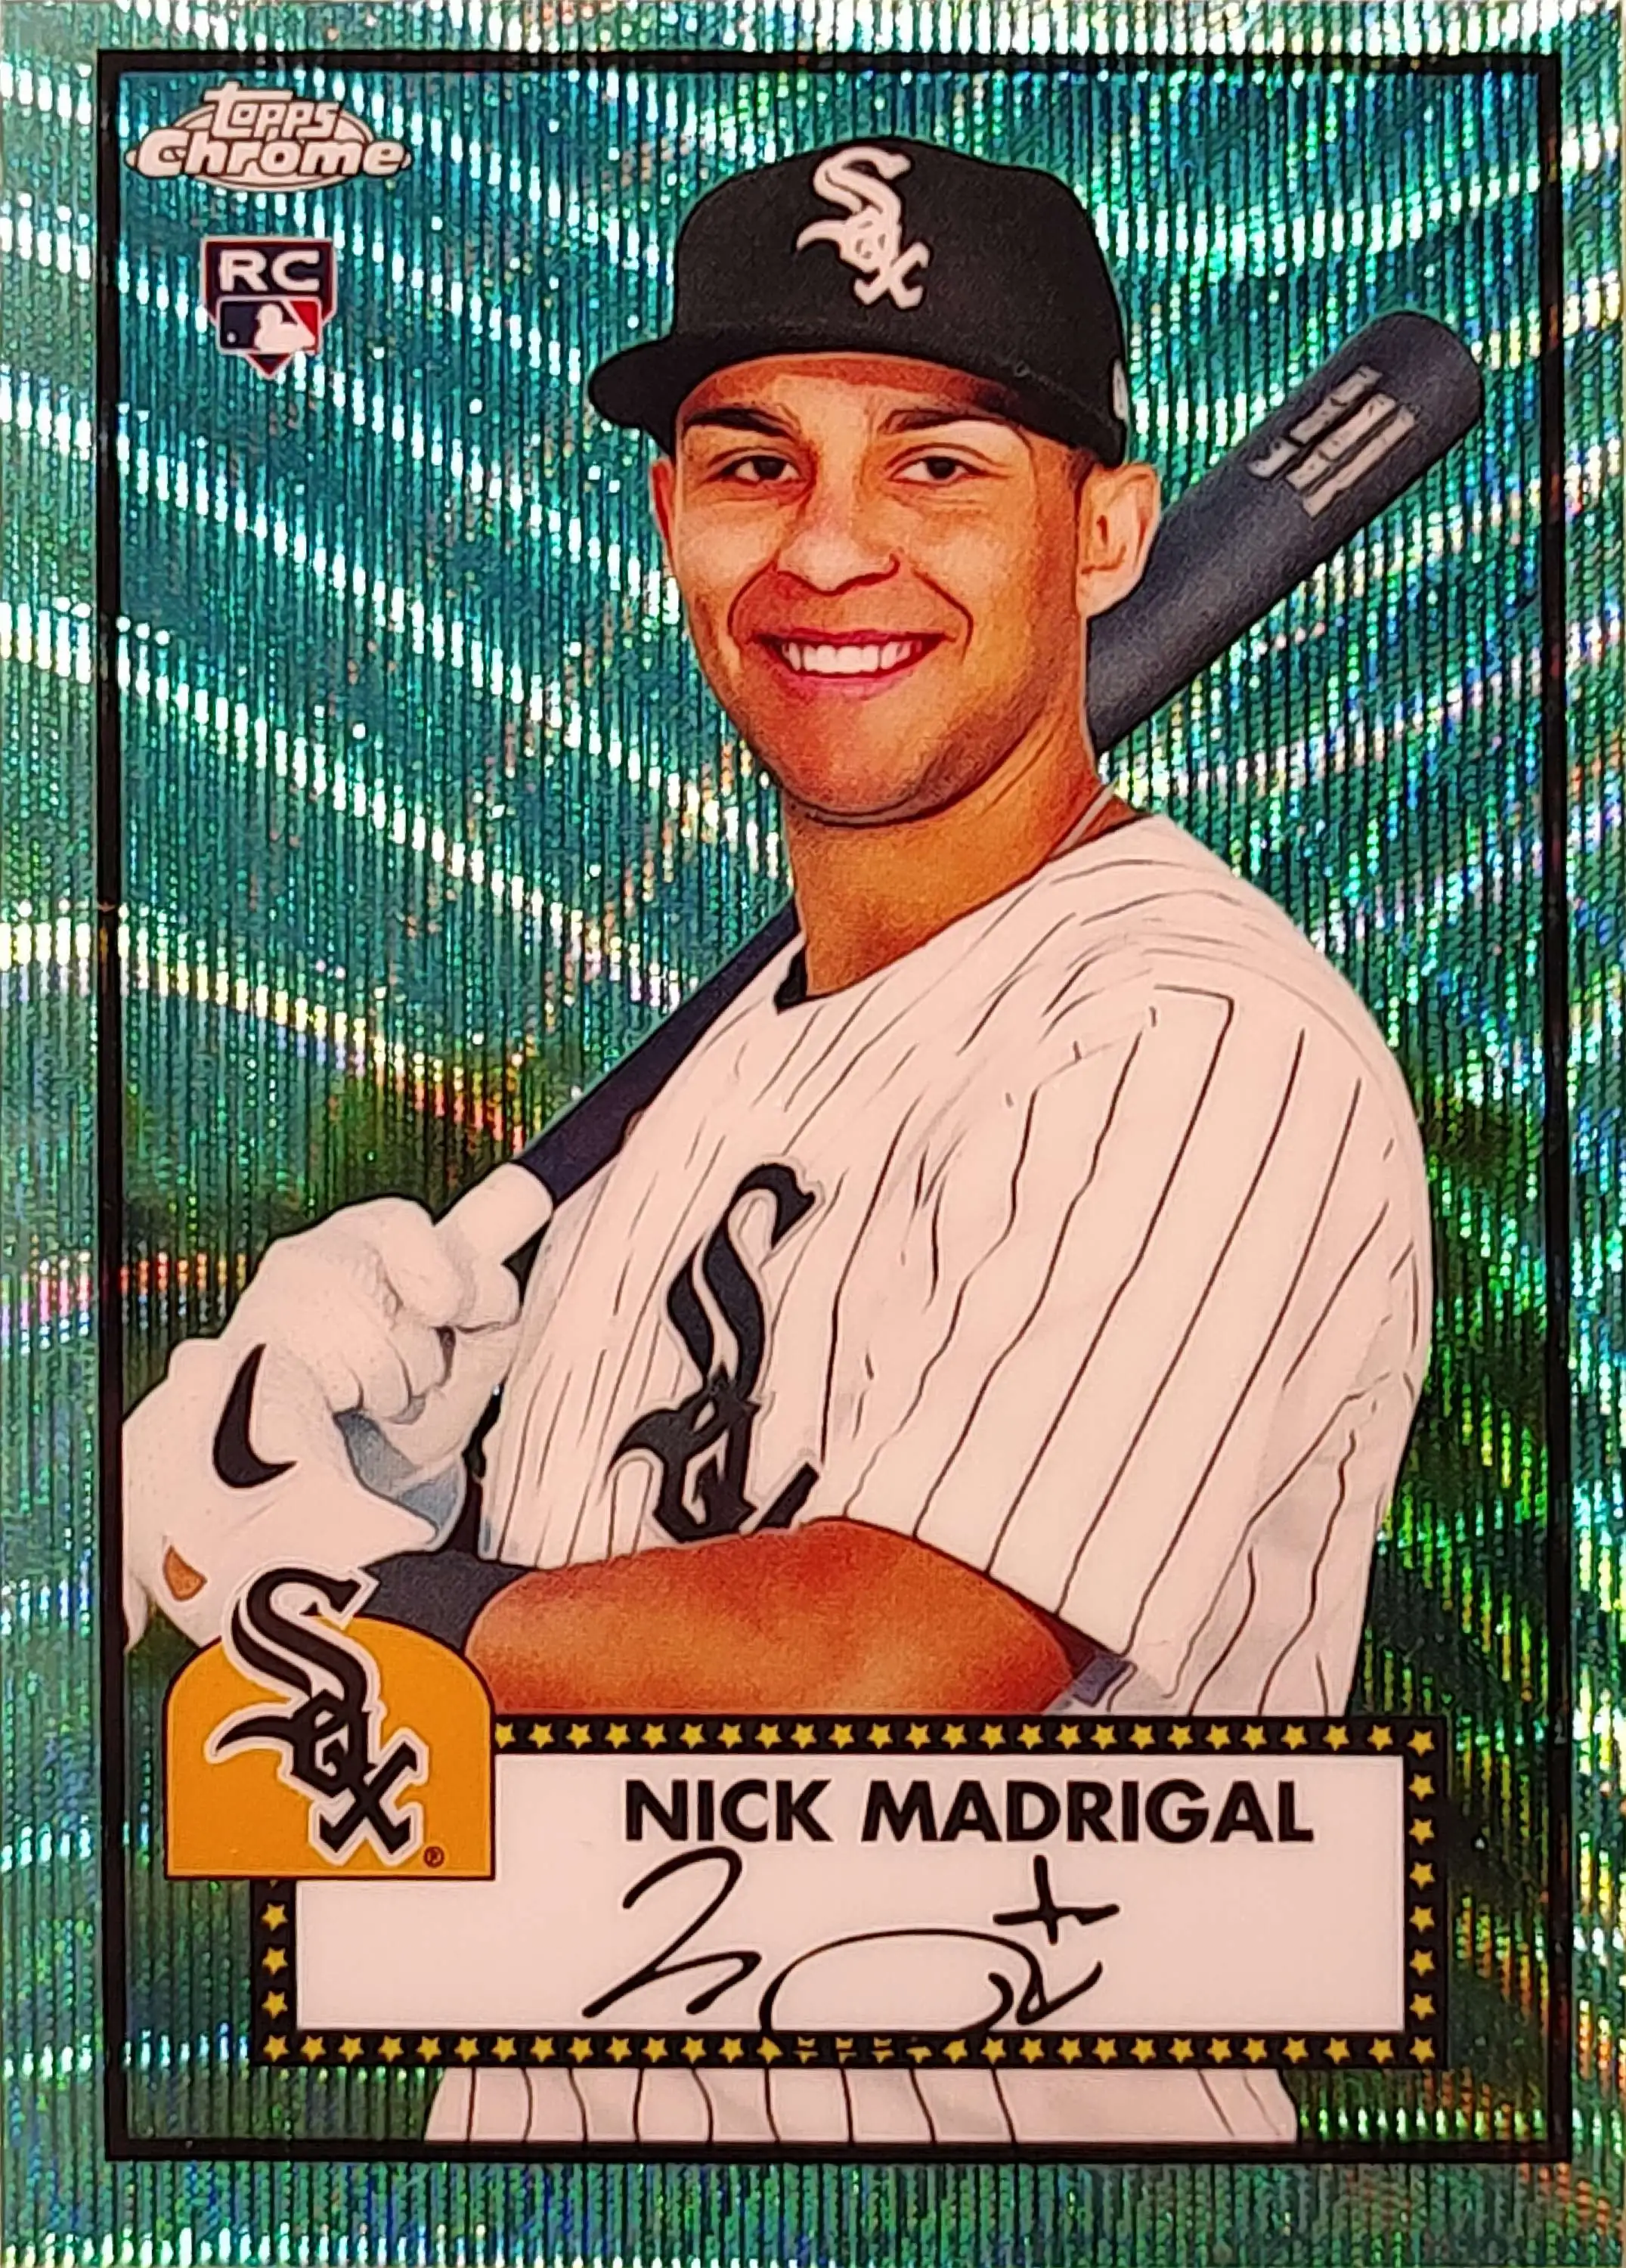 Nick Madrigal's upbringing in the MLB